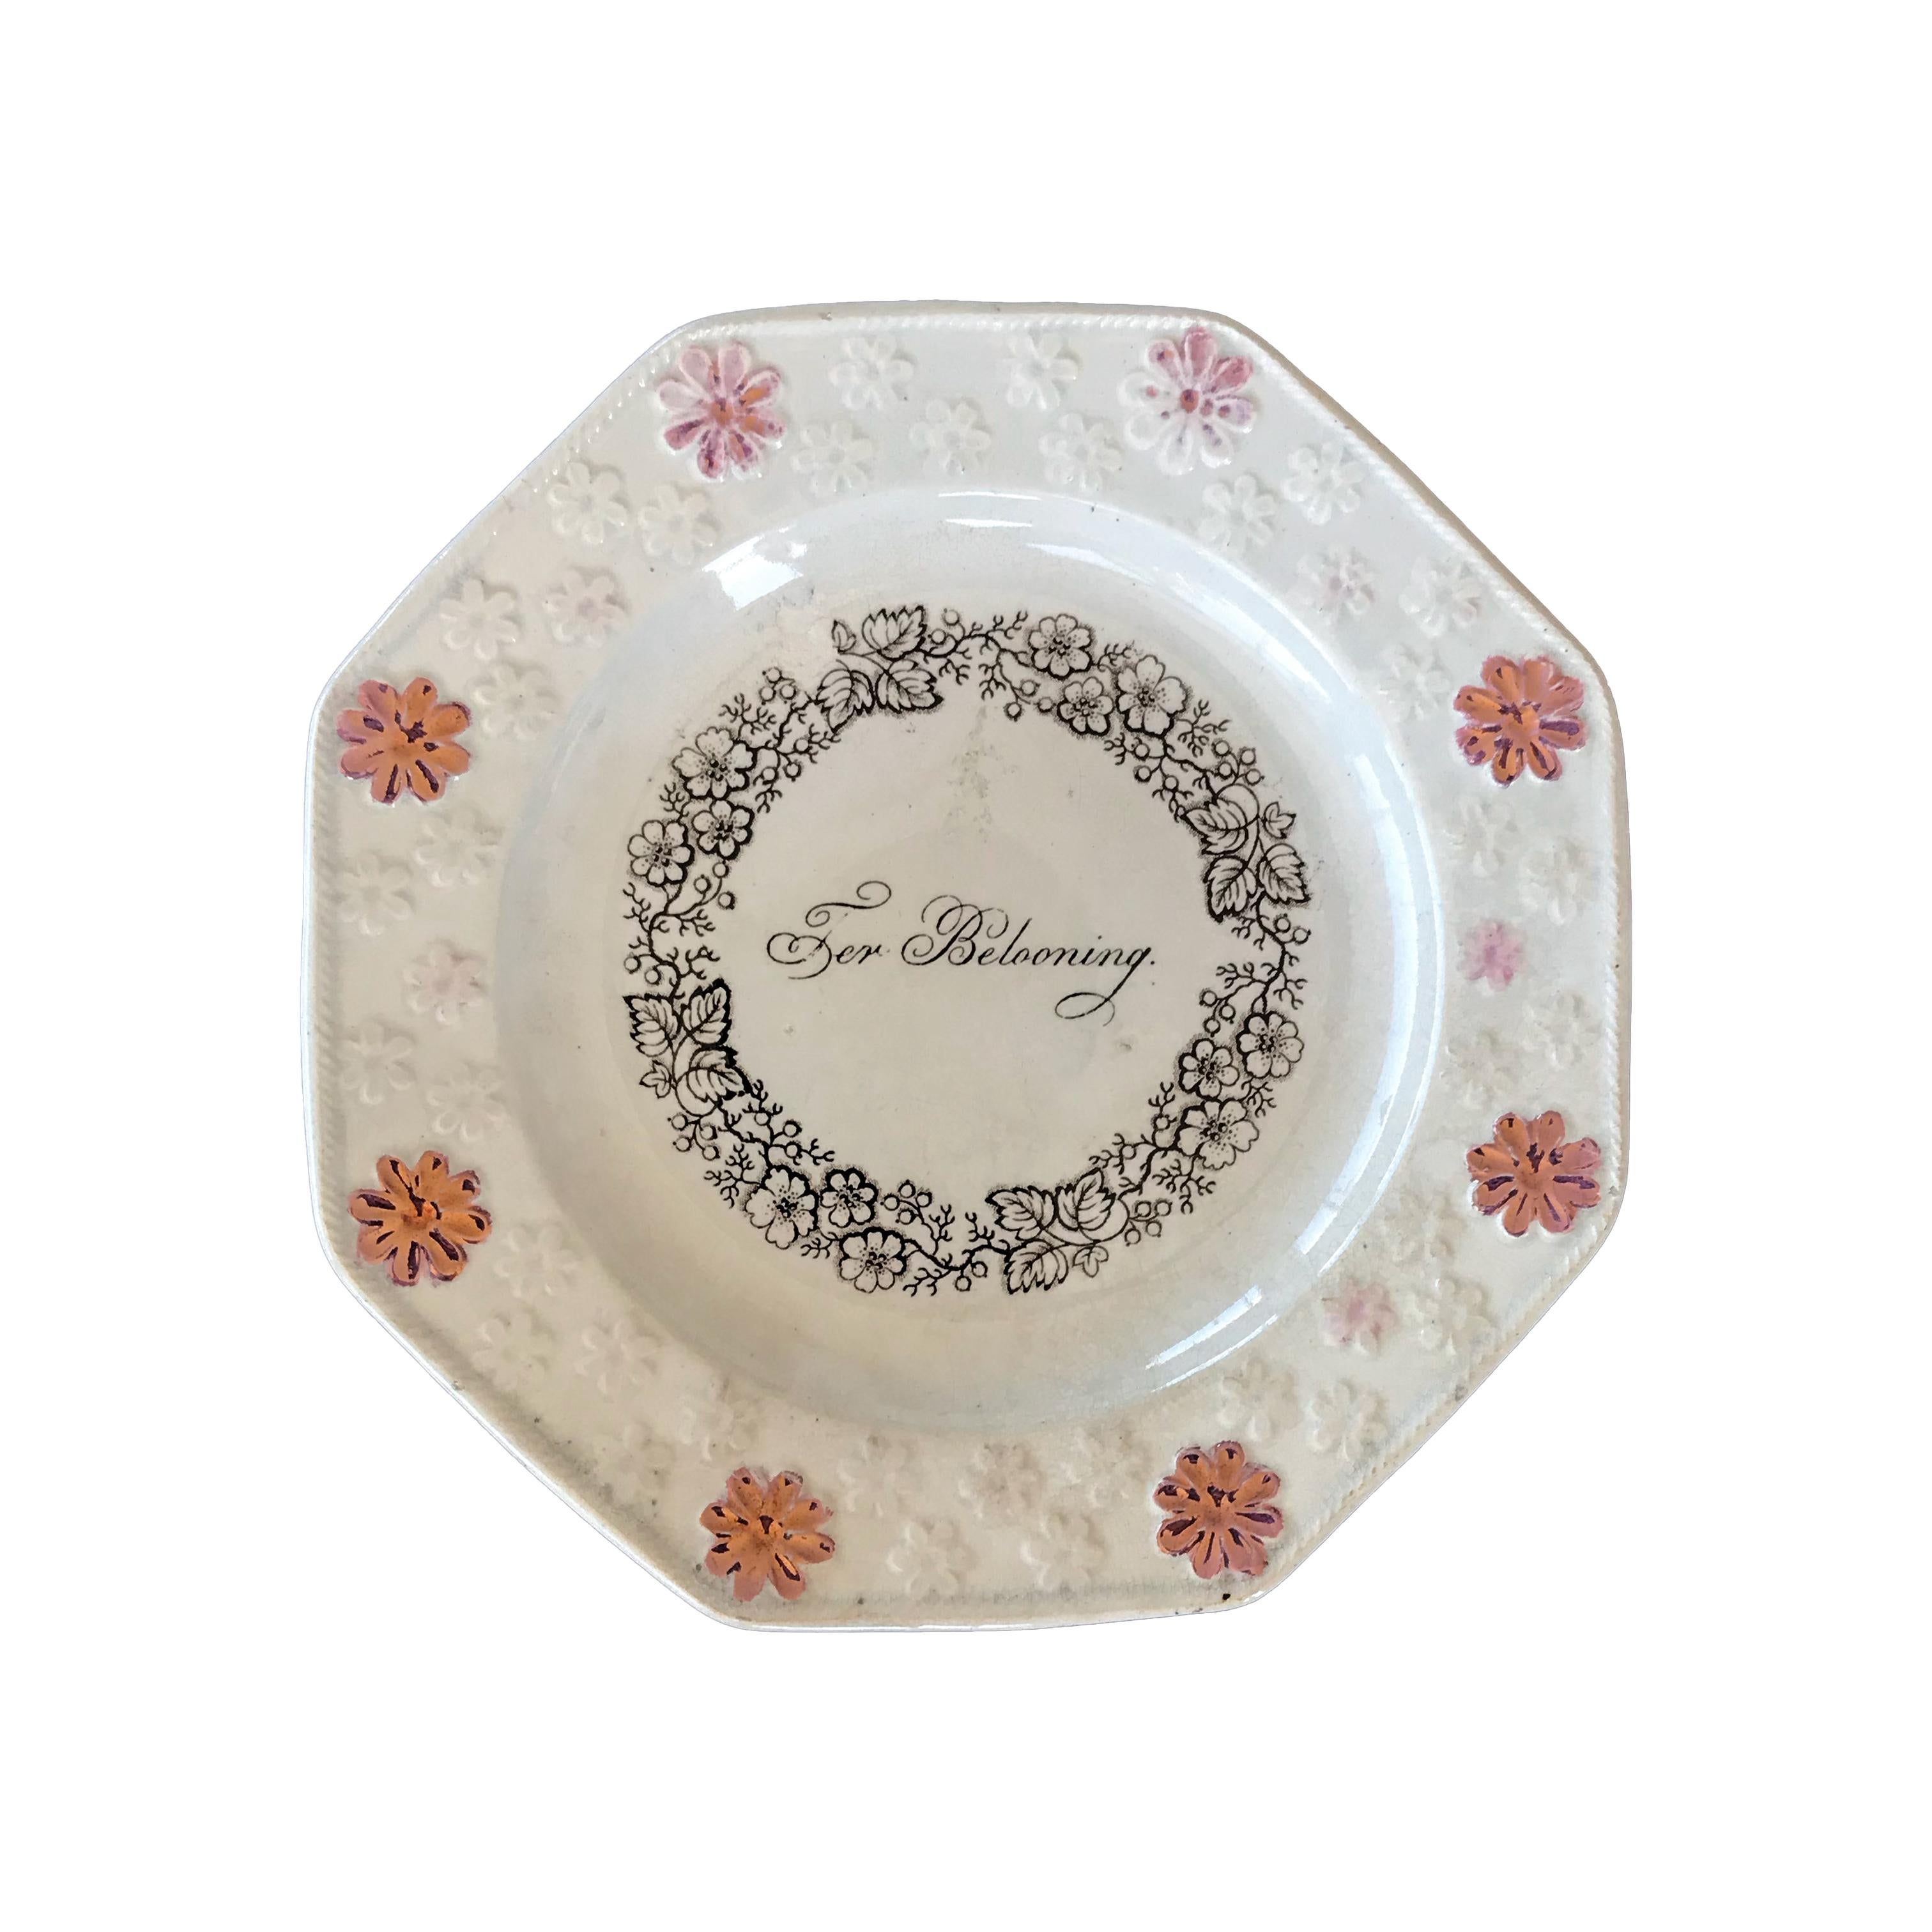 Wonderfully evocative children's plates with molded daisy decoration and dedications in old dutch: 'aan myne kleine vriendin